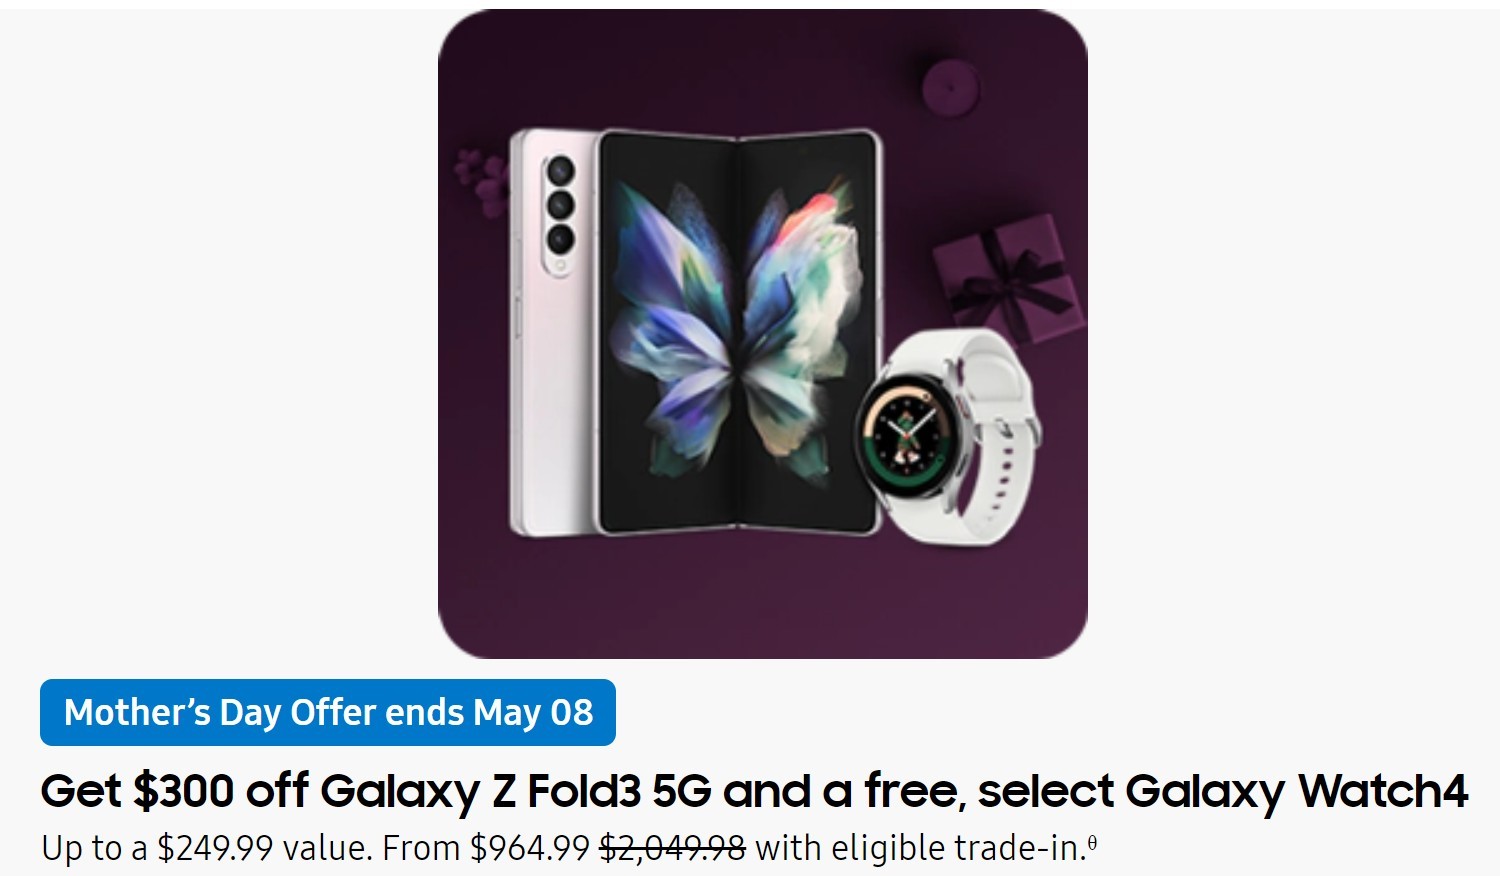 Samsung US deals for Mother's Day include free memory upgrades, Galaxy Buds and Watches